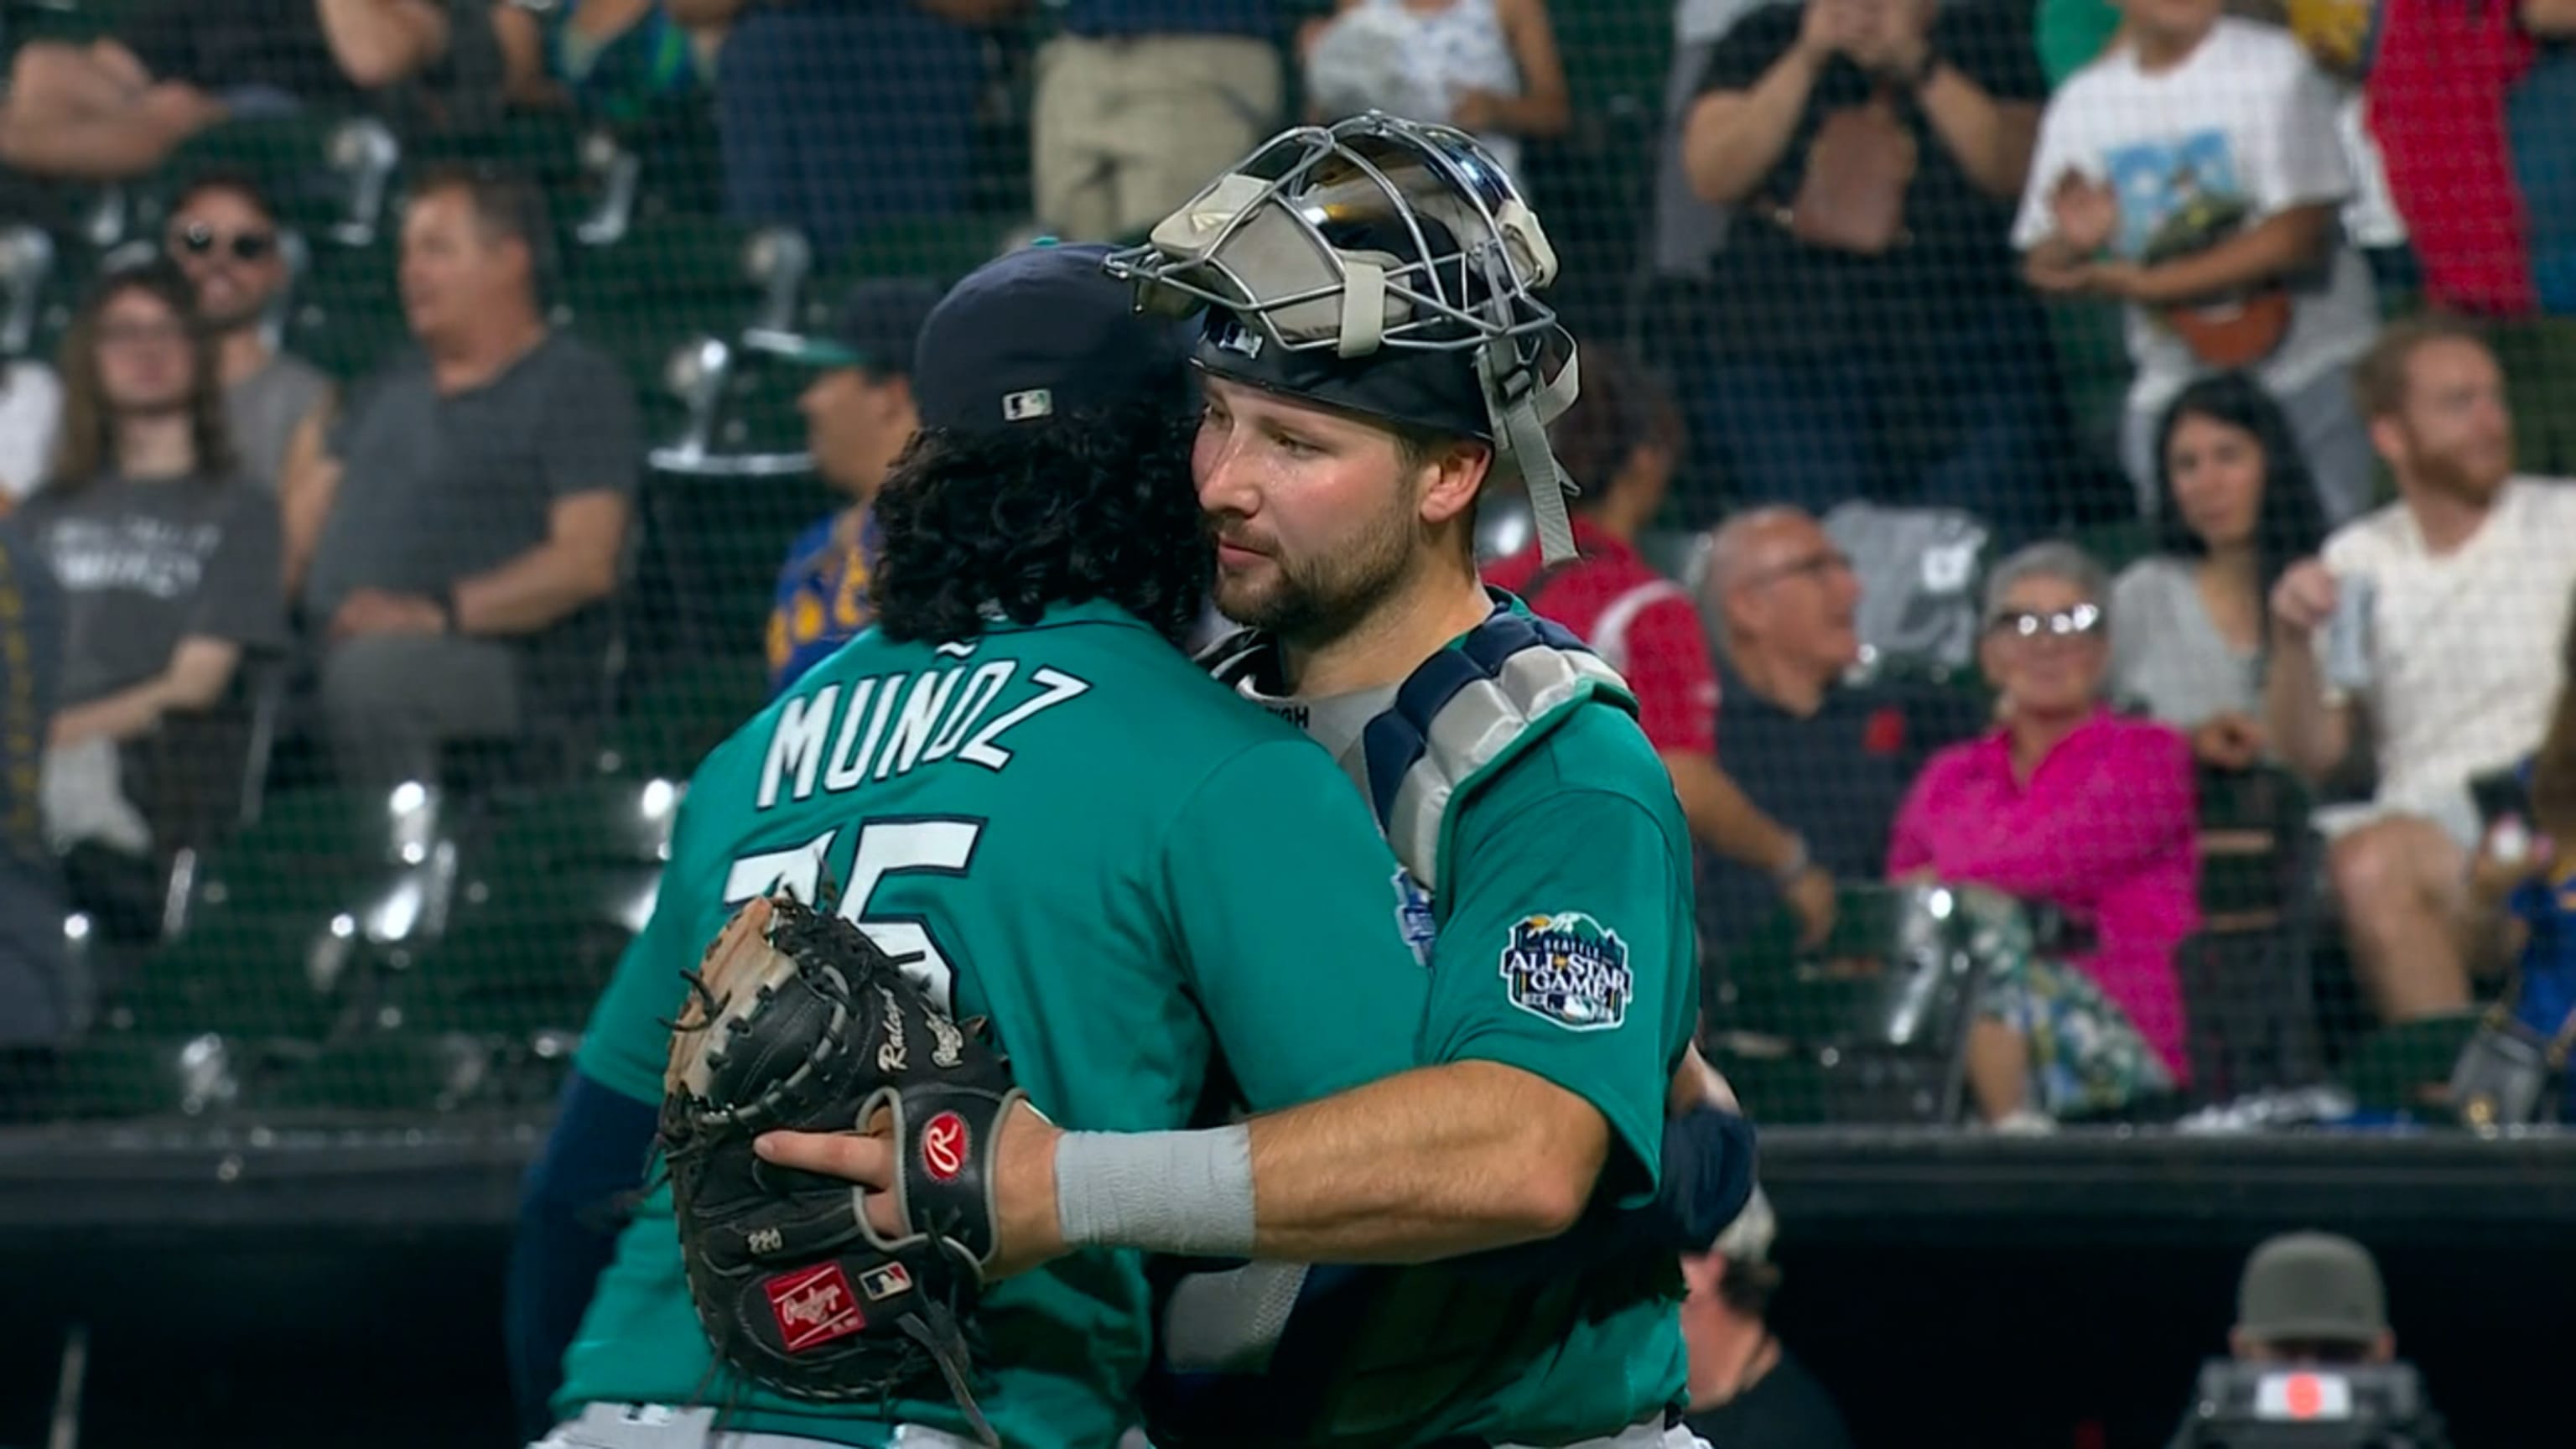 Mariners Woo their way to victory, shutout Angels 8-0 to even series —  Converge Media